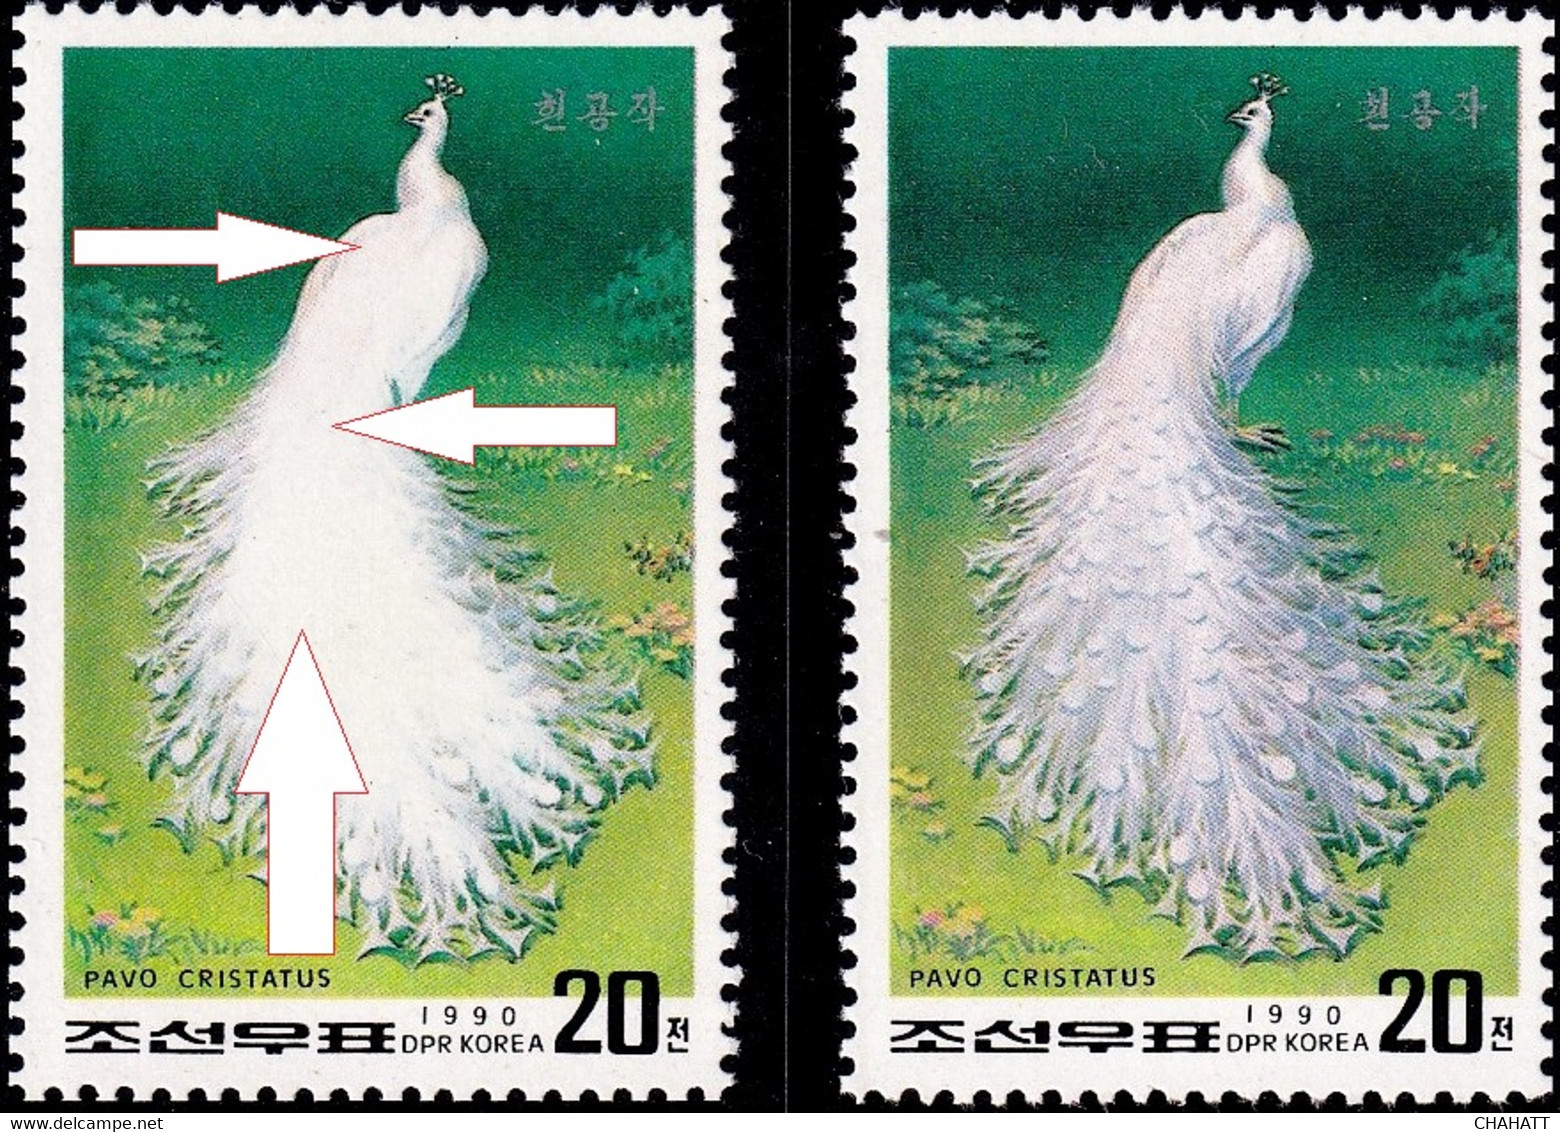 WHITE PEACOCK- PHEASANTS-ERROR WITH NORMAL -EYELETS MISSING- KOREA- 1990-EXTREMELY SCARCE- MNH-BR4-16 - Pauwen